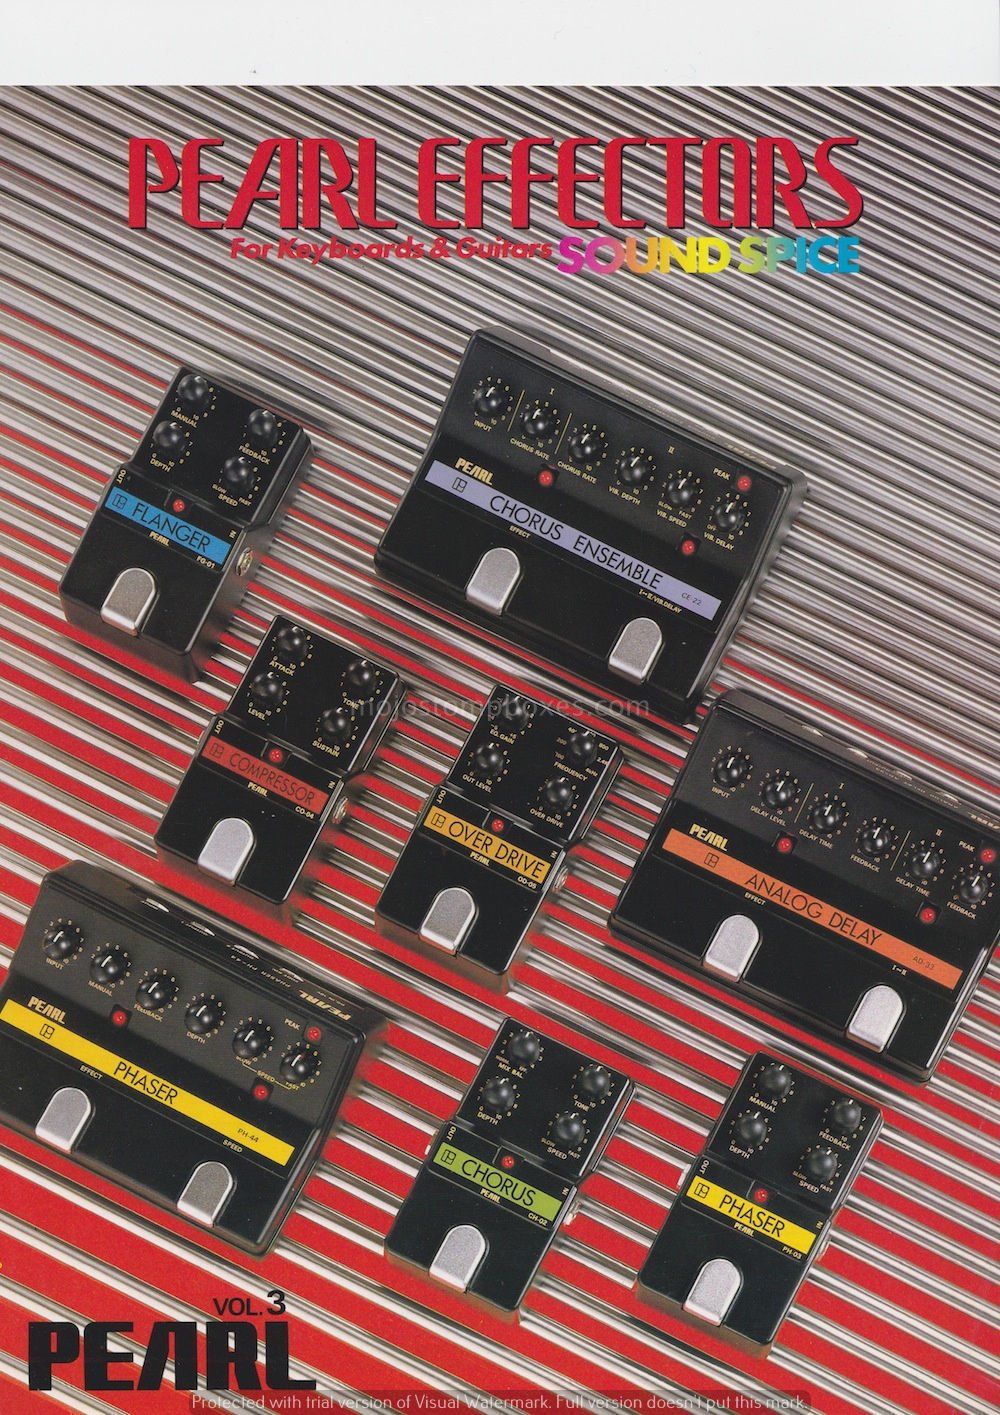 An advert for Pearl effectors for keyboards and guitarists